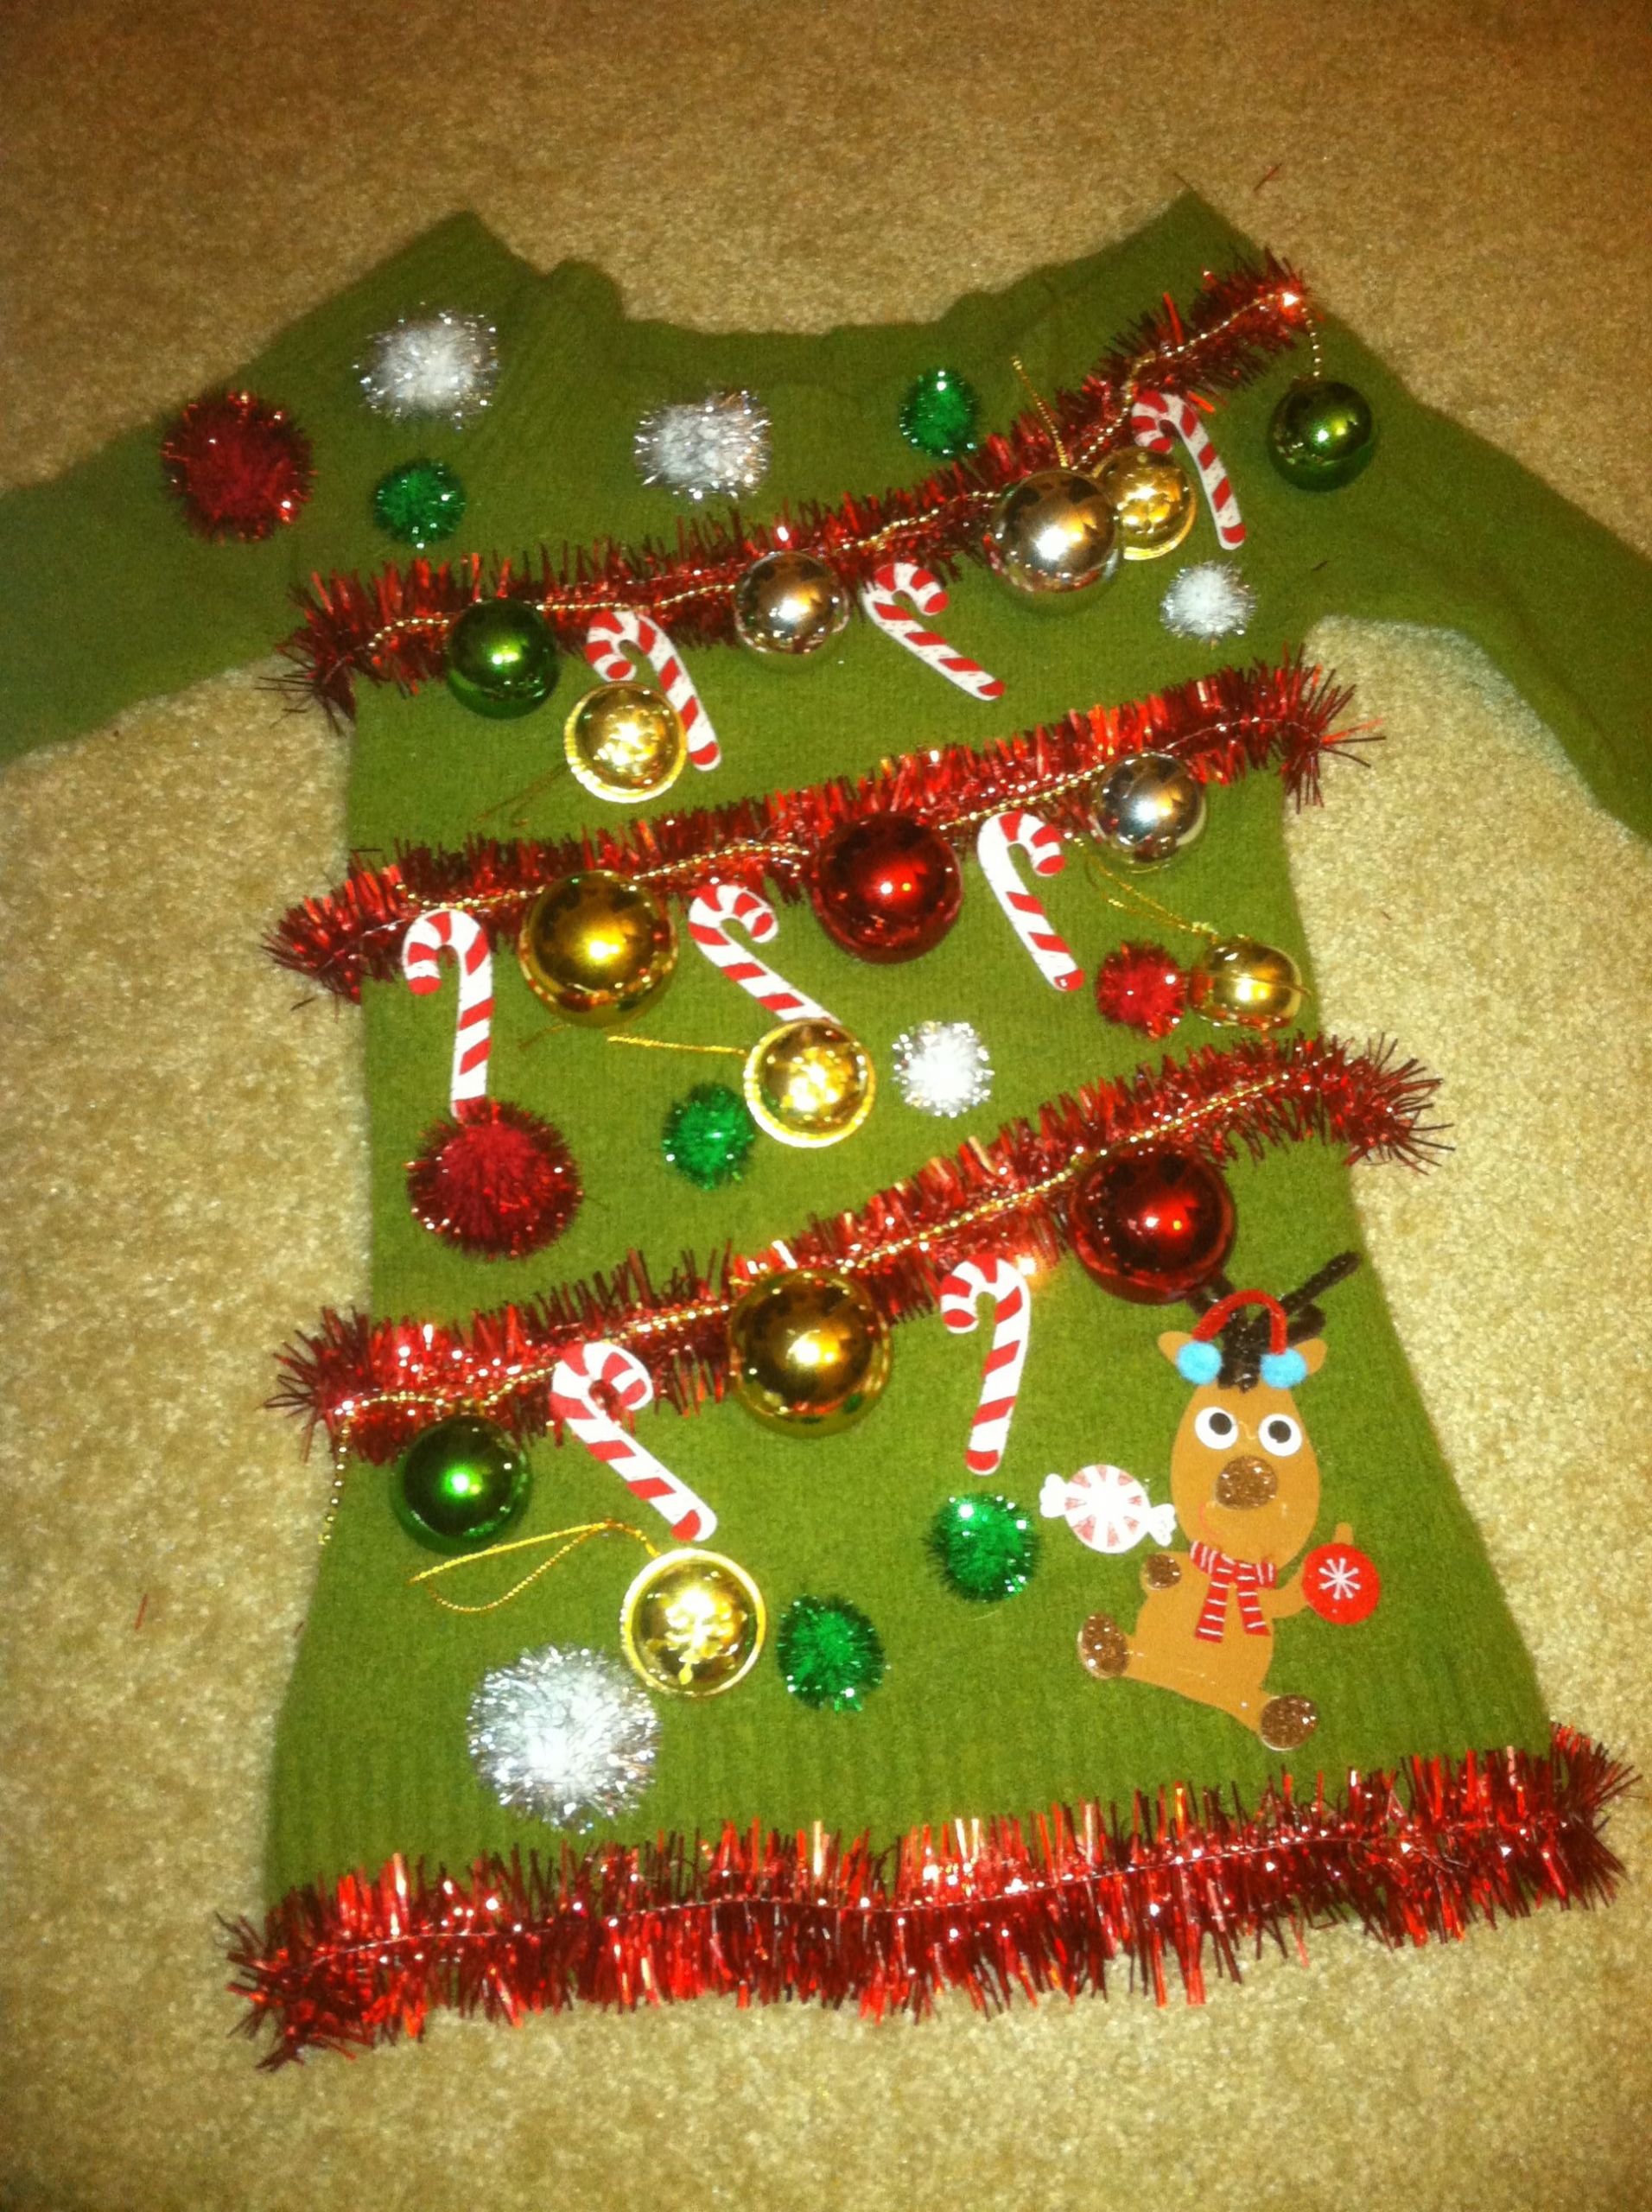 DIY Ugly Christmas Sweater Pinterest
 26 DIY Ugly Christmas Sweaters That Prove You re Awesome